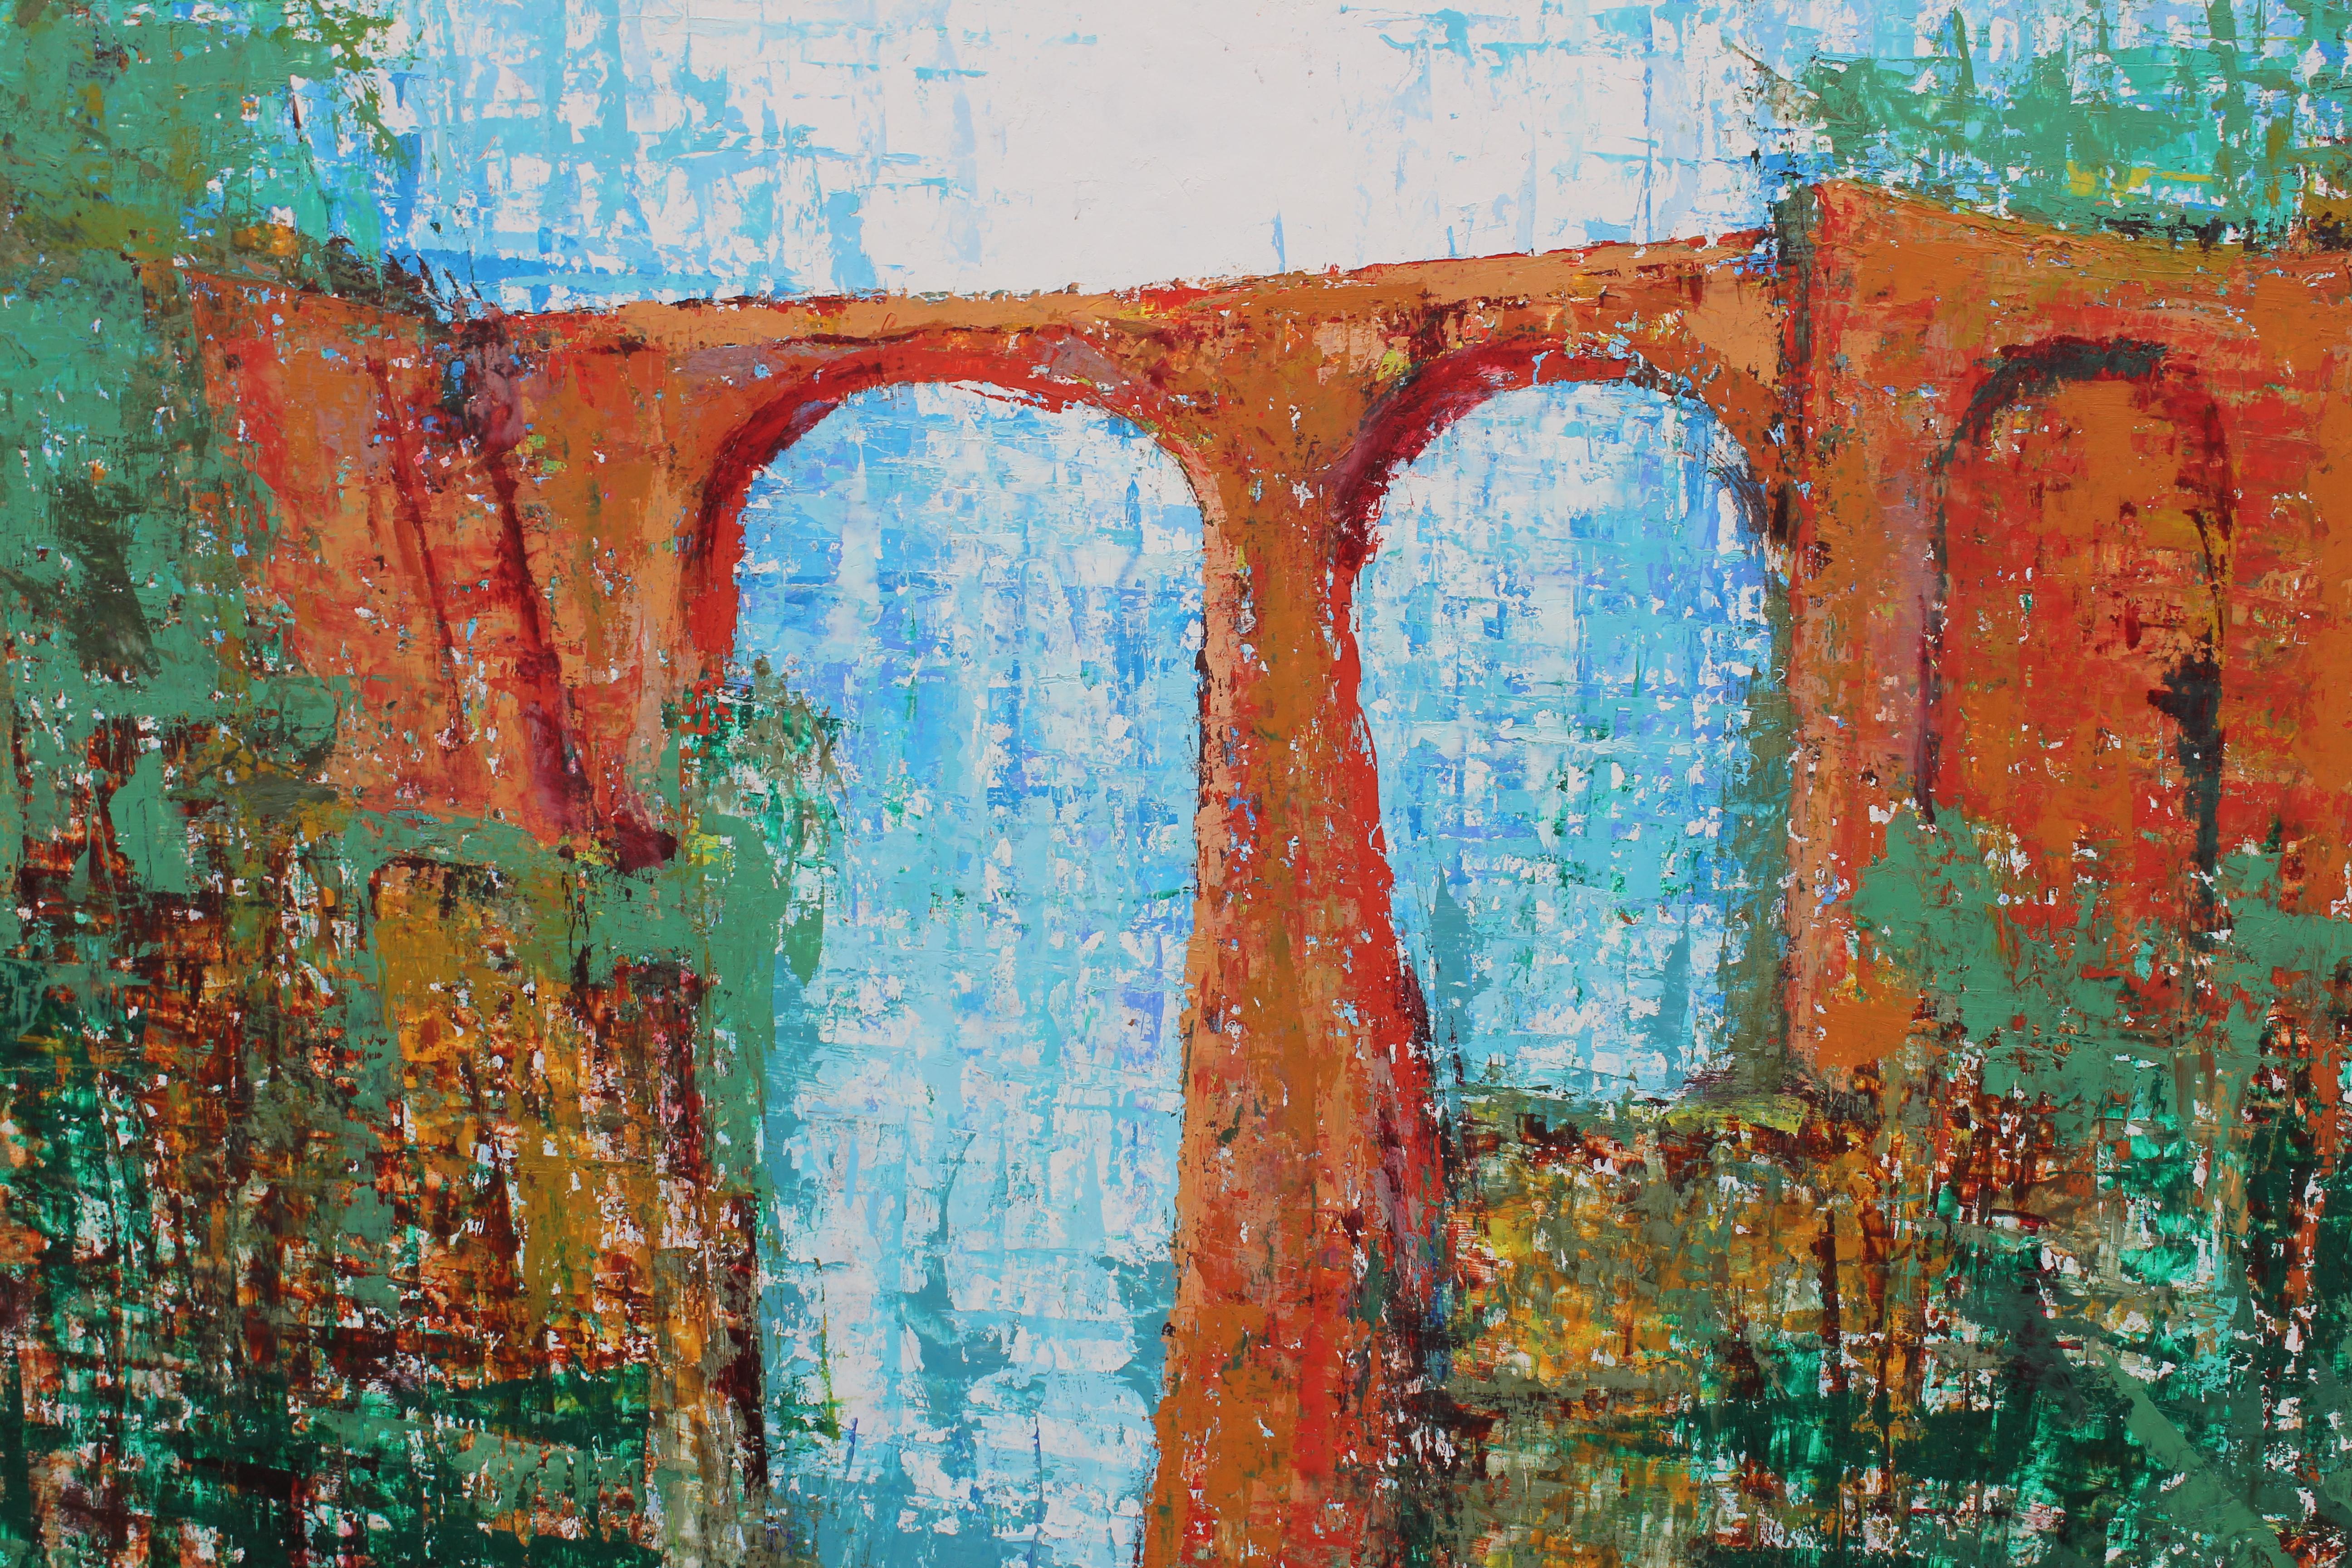 Aqueduct Impressionist Landscape View - Painting by Unknown